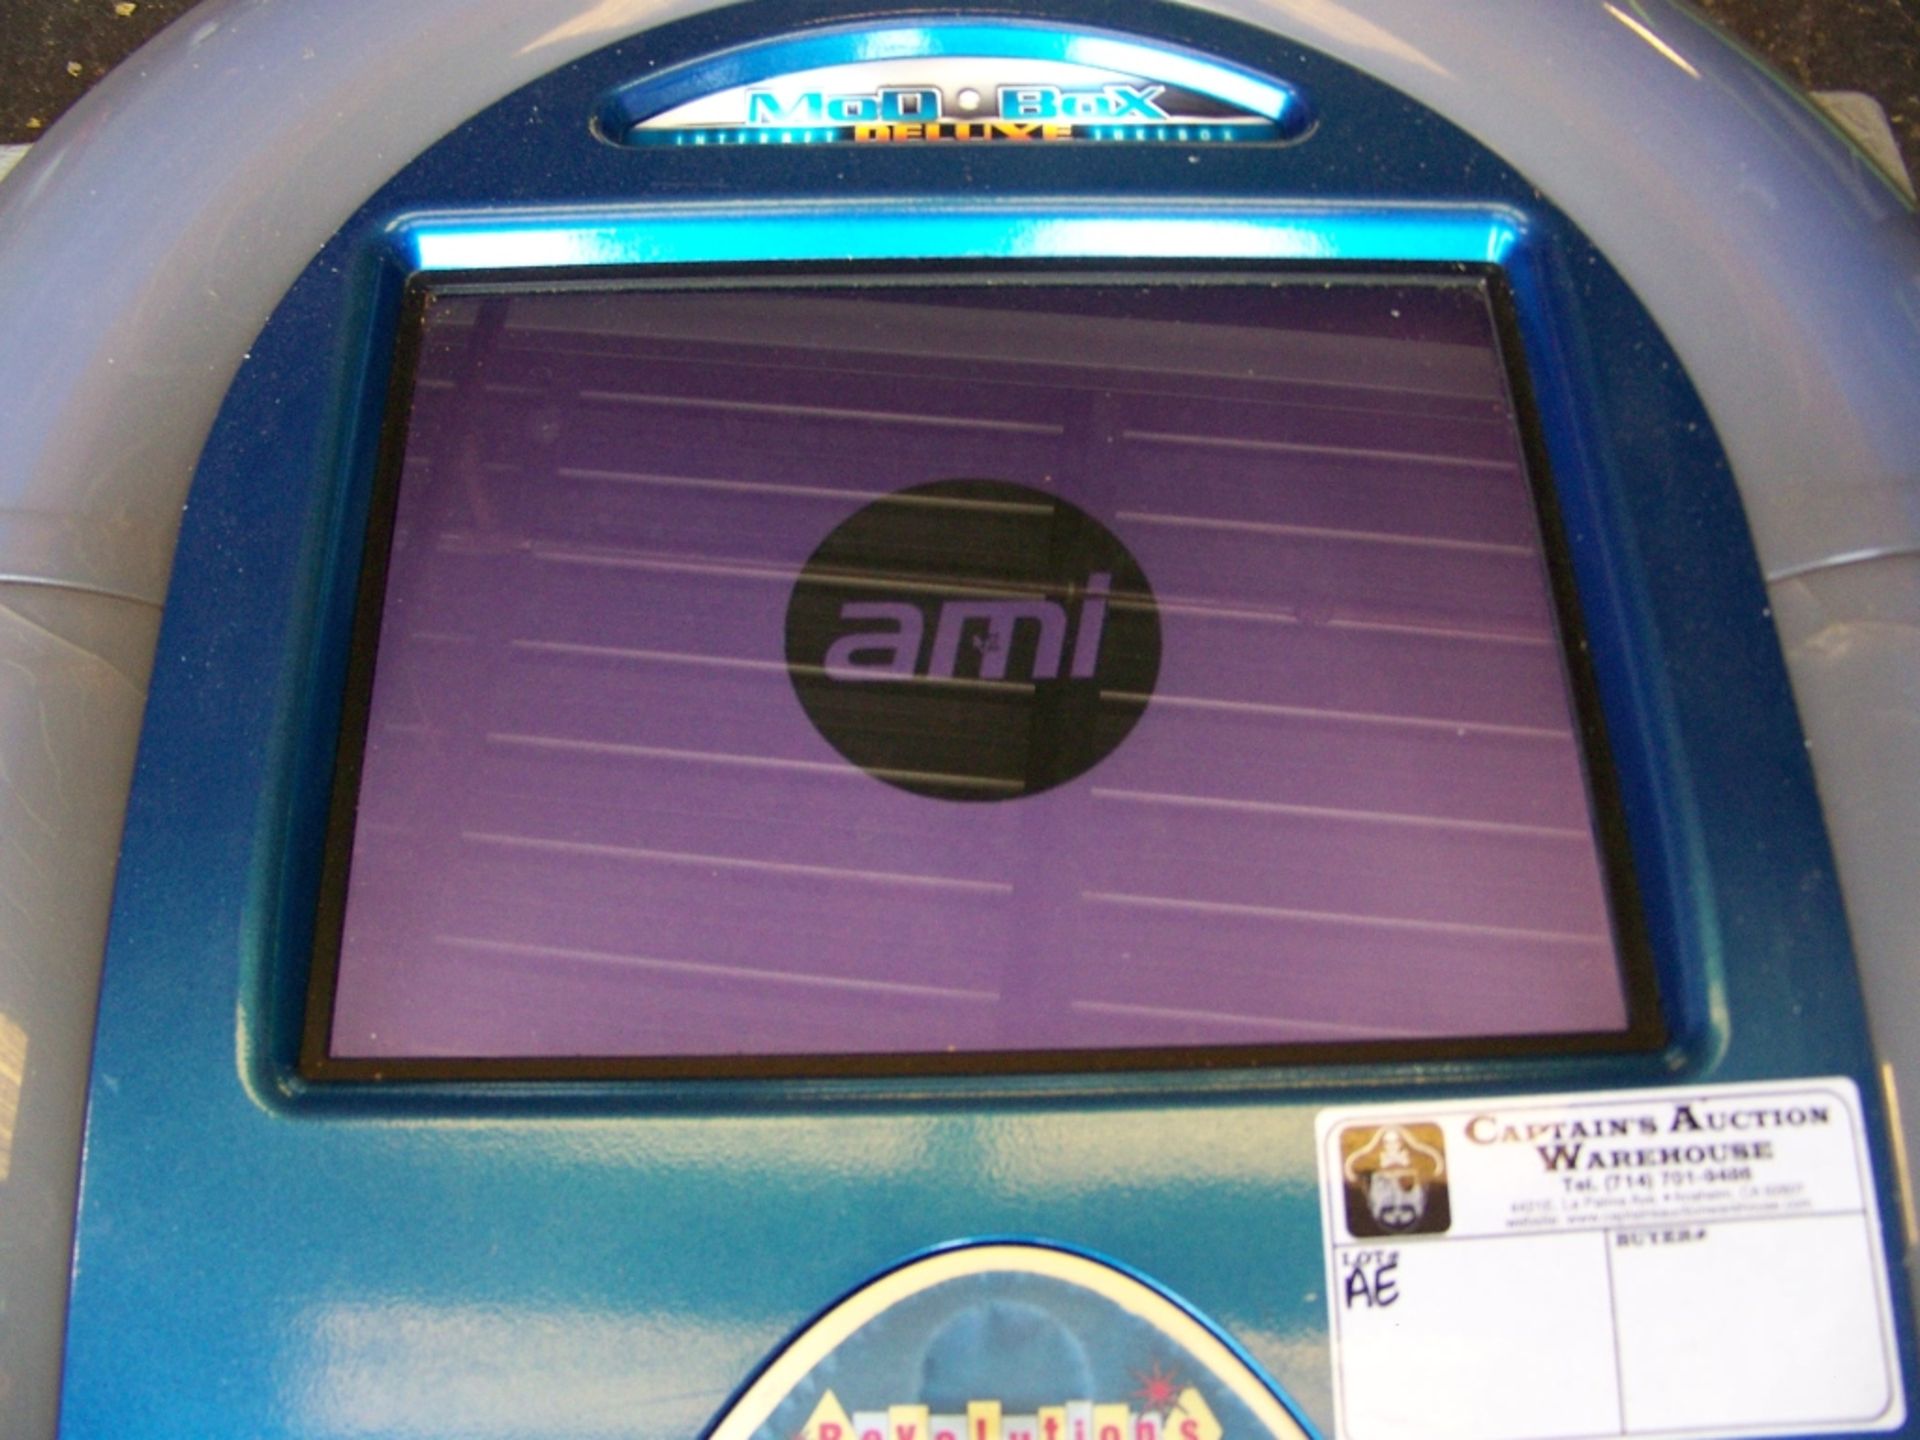 AMI MOD BOX WALL MOUNT DIGITAL JUKEBOX Item is in used condition. Evidence of wear and commercial